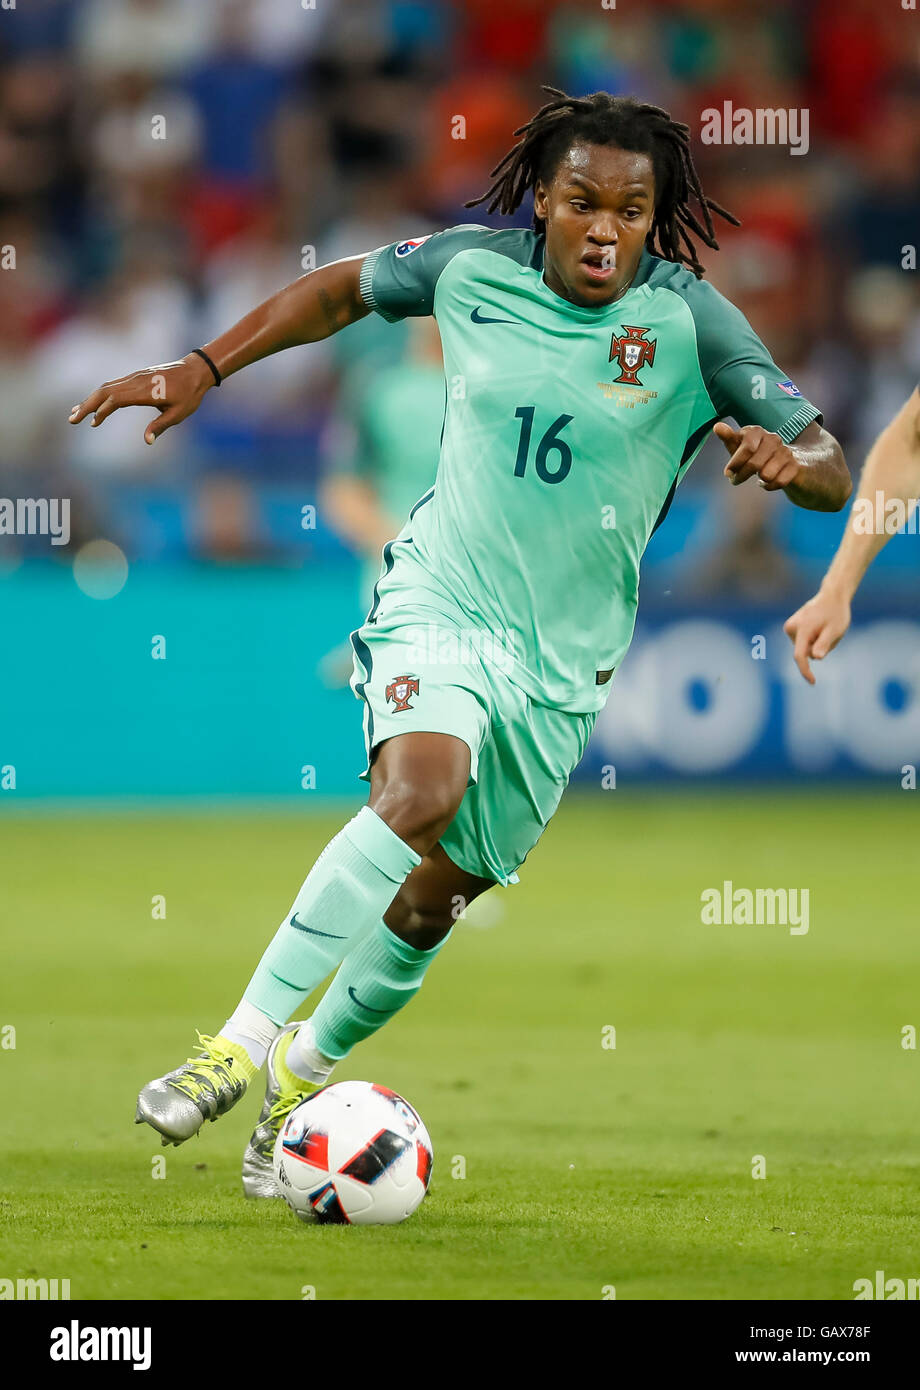 Lyon, France. 6th July, 2016. Renato SANCHES, Por 16  drives the ball, action, full-size,  PORTUGAL - WALES  2-0 Semifinal ,Football European Championships EURO at  06 July, 2016 in Lyon, Stade de Lyon, France. Fussball, Nationalteam, Halbfinale,06.07.2016  Credit:  Peter Schatz / Alamy Live News Stock Photo